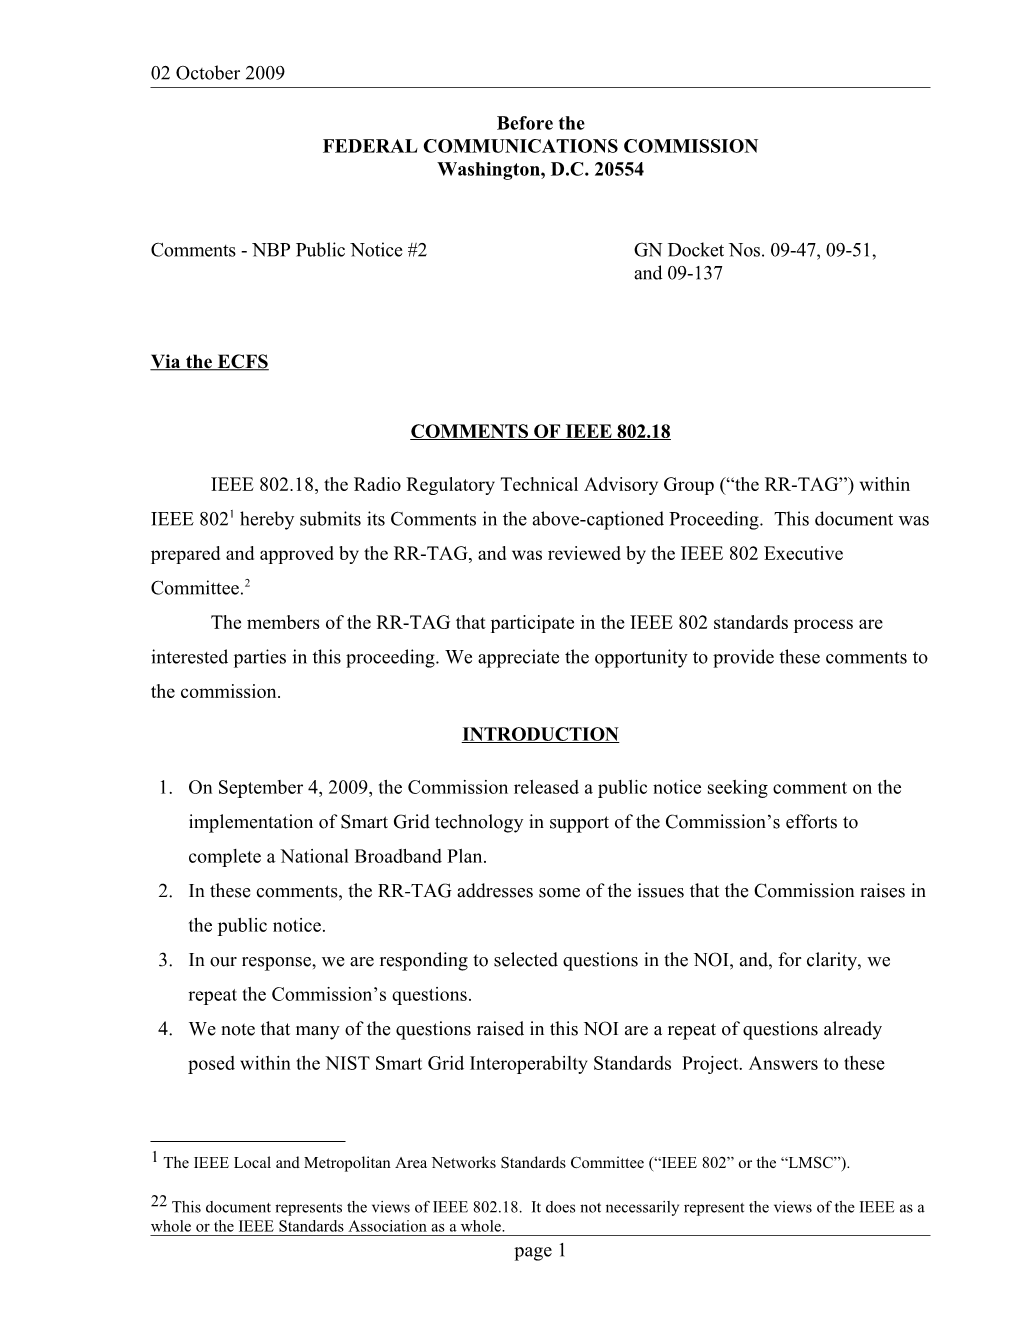 IEEE 801.18 Comments on Progeny Request for Waiver of M-LMS Construction Rule s2